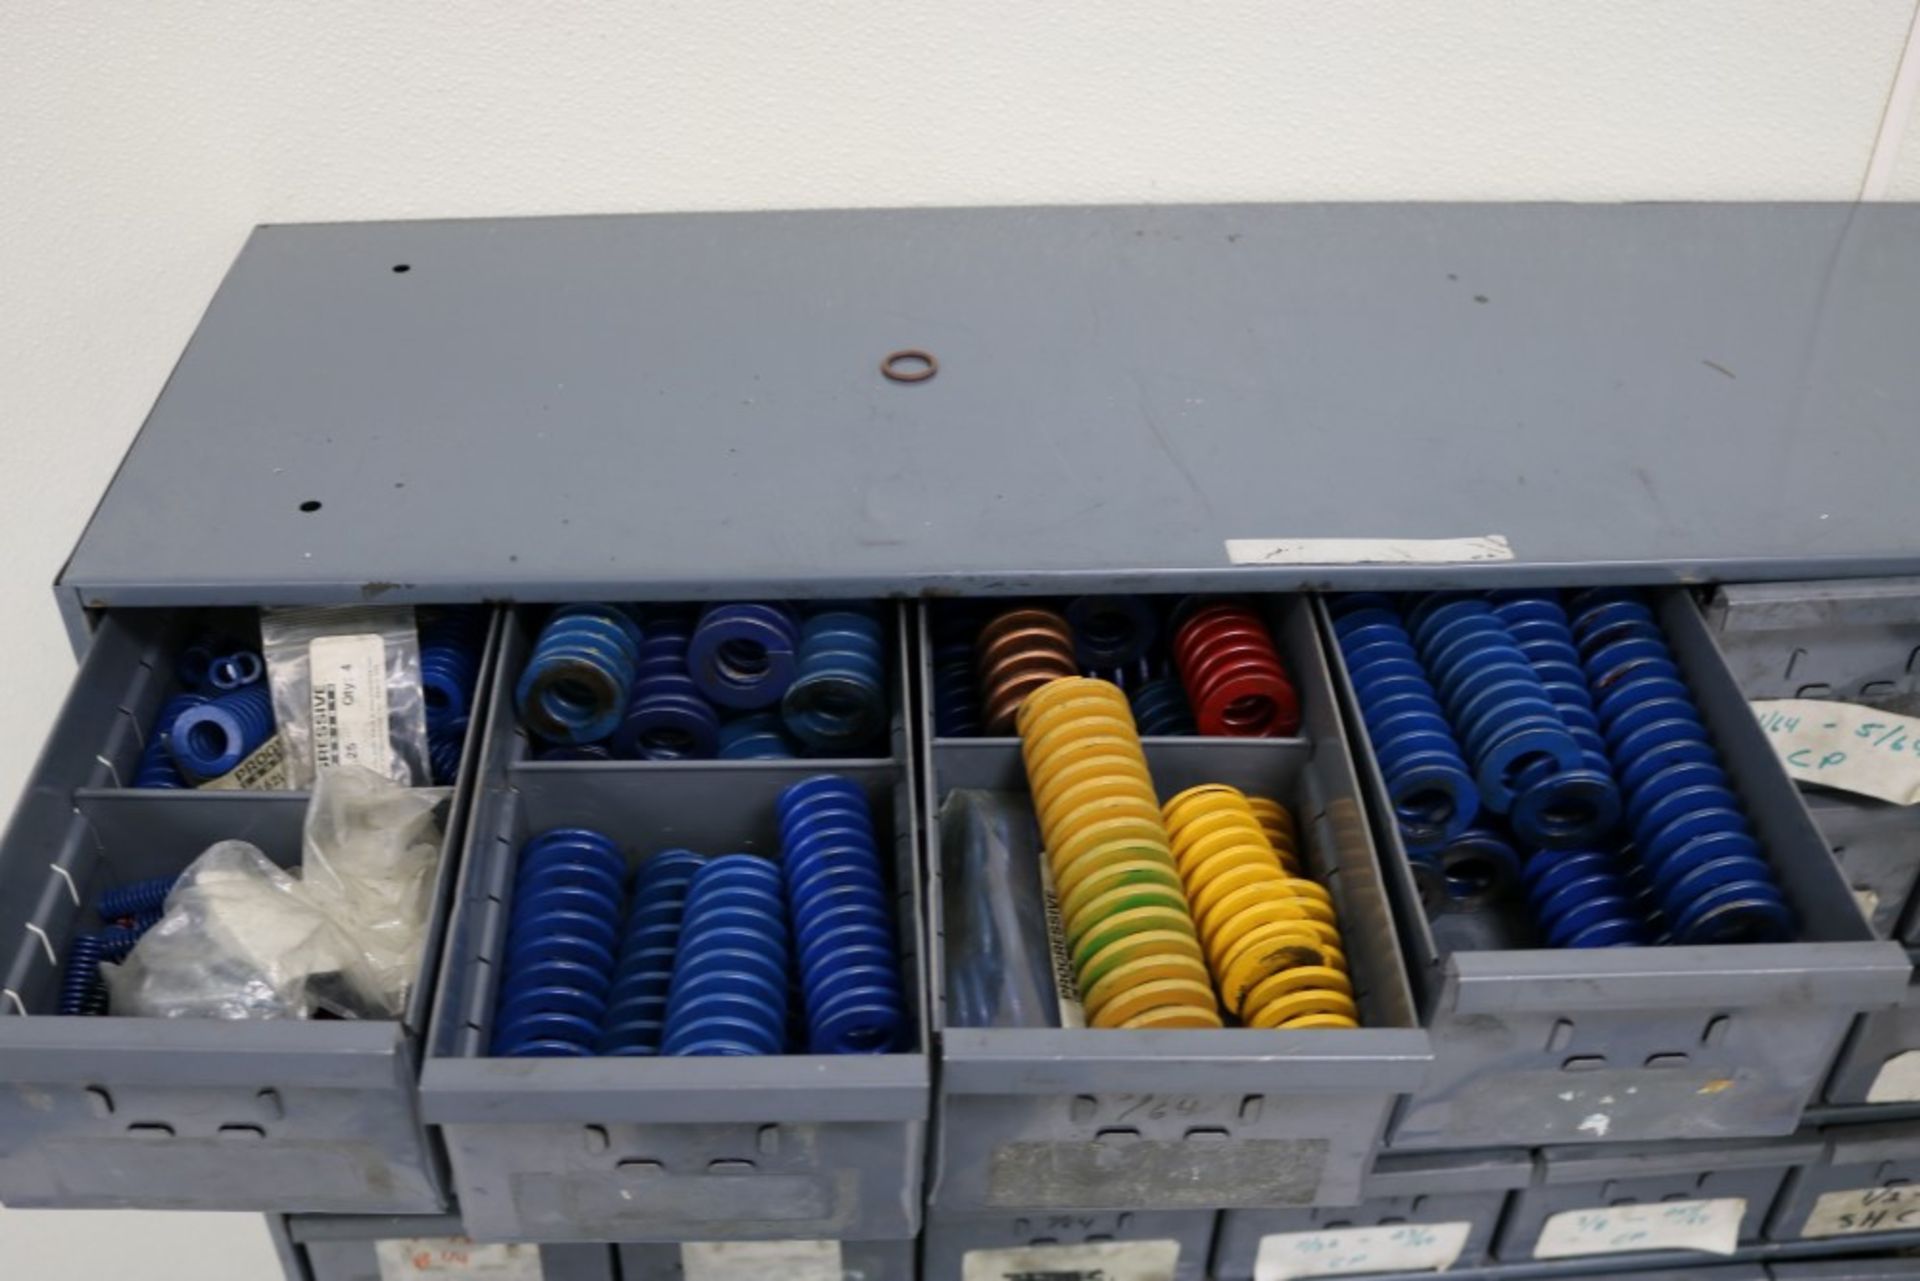 24 Bin Organizer Full of Various Sized Die Springs and Return Pins for Injection Molds - Image 3 of 9